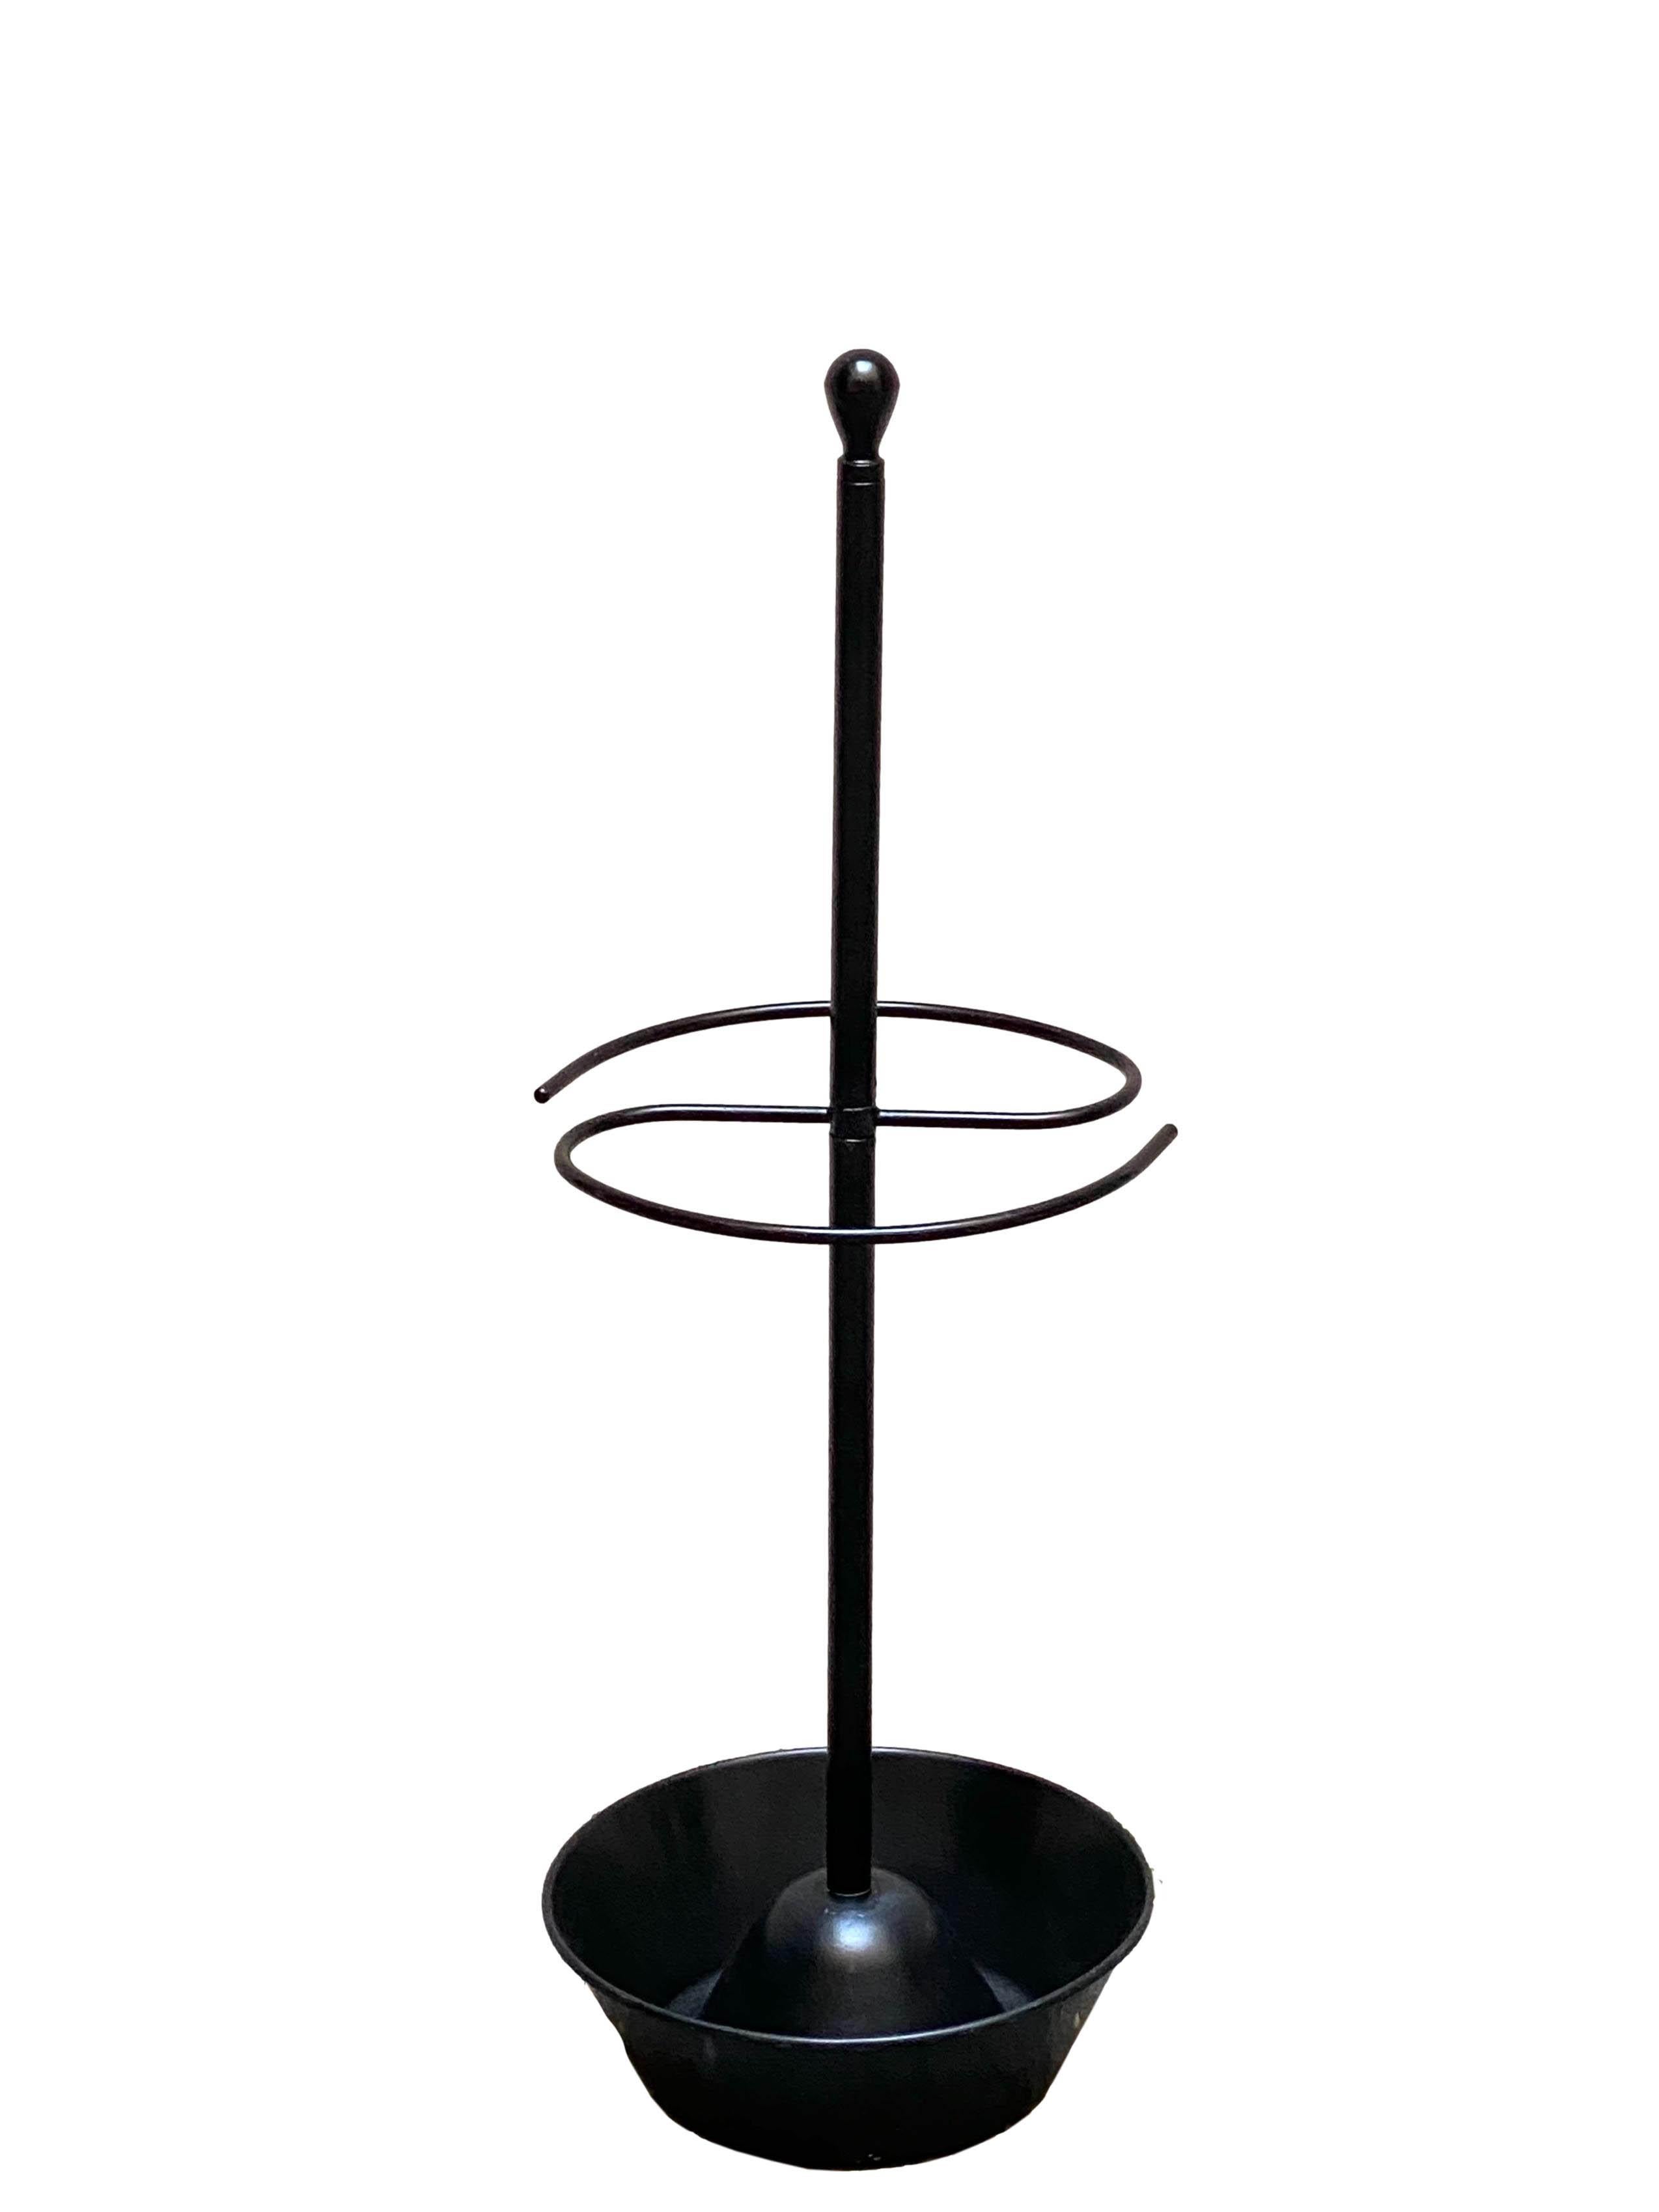 Servopluvio is an essential and intelligent umbrella stand, designed by Achille and Pier Giacomo Castiglioni in 1961 for the Servi series.
It consists of a basin to collect water, a pole and the intriguing, characteristic serpentine that holds the